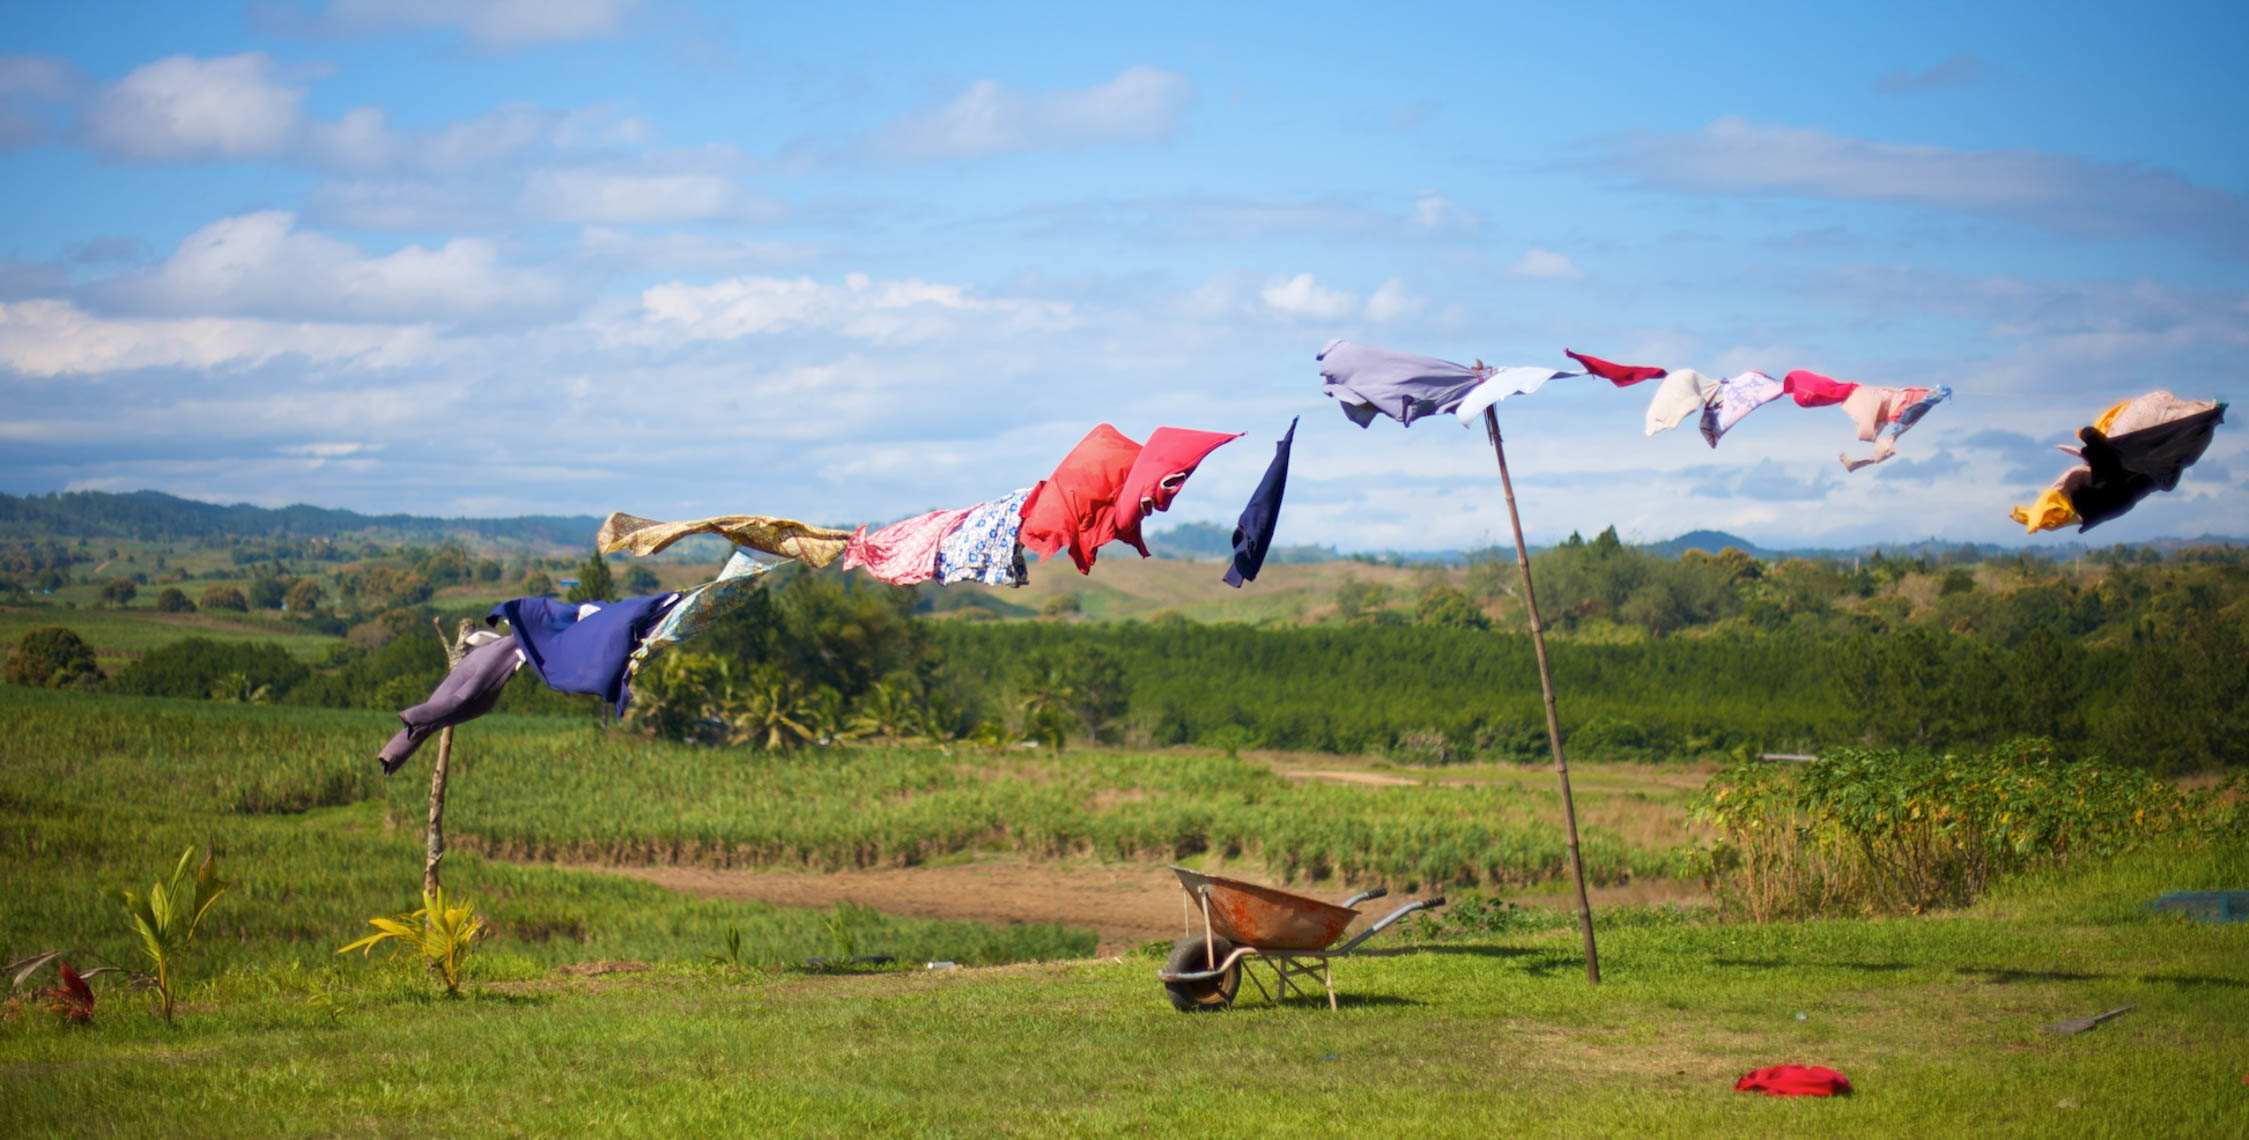 Windy Day with Laundry on a Line in Fiji